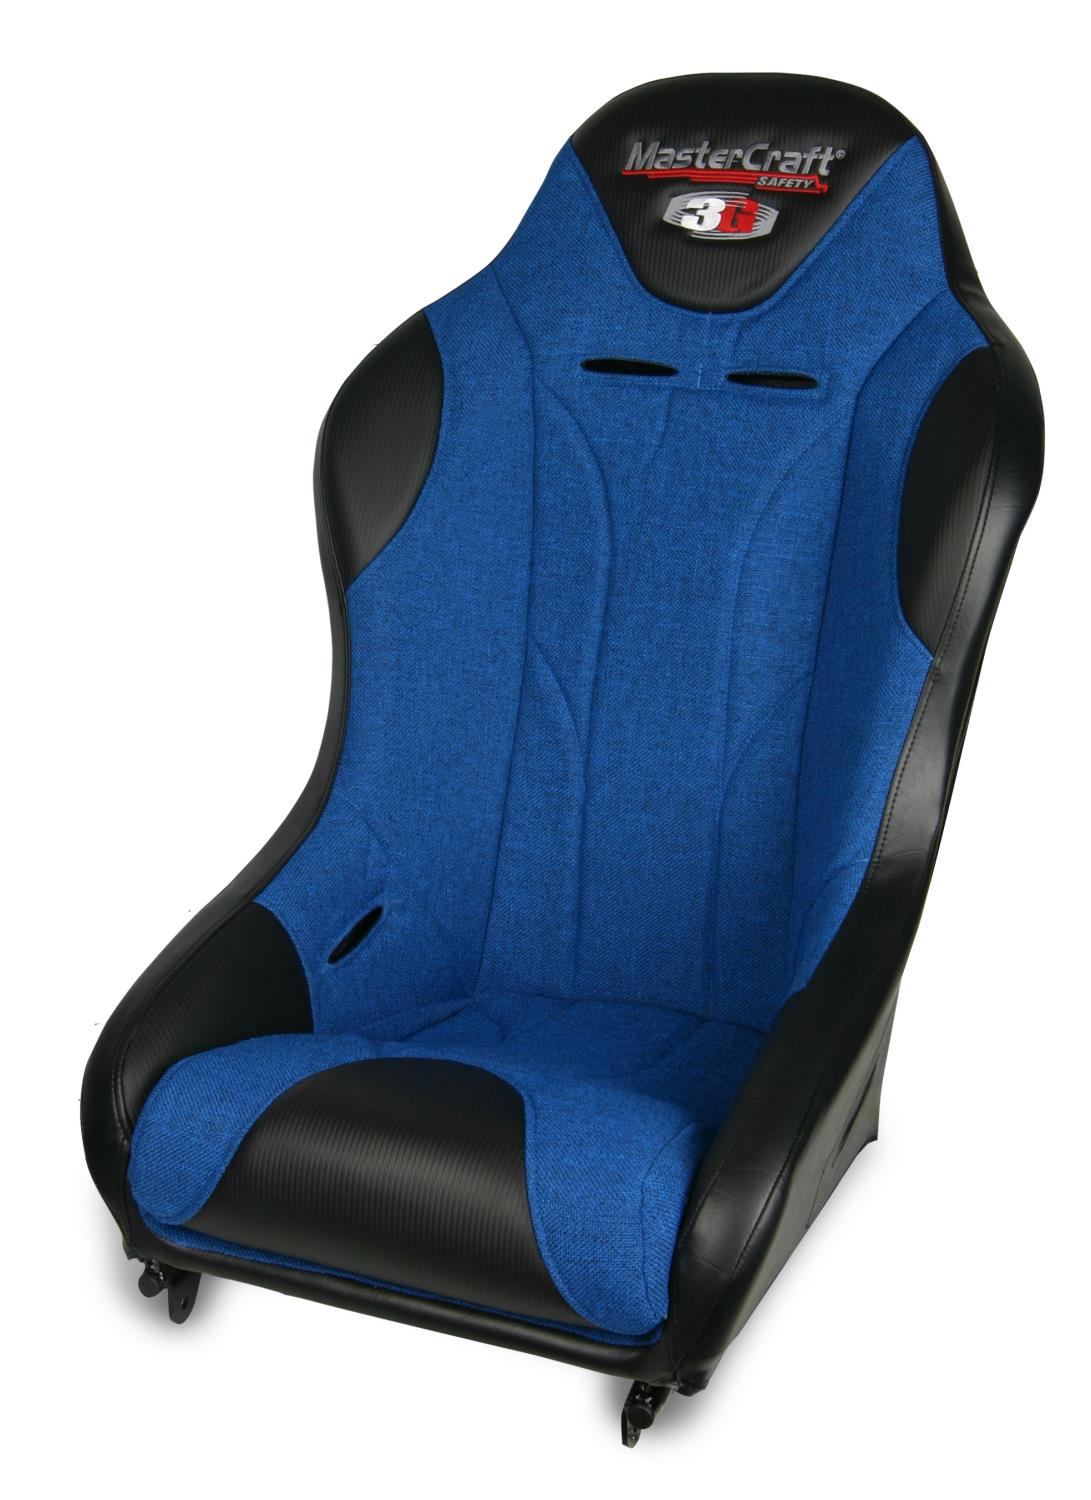 572033 2 in. WIDER 3G-4 Seat w/DirtSport Stitch Pattern, Black with Blue Fabric Center and Blue Side Panels, Black Band